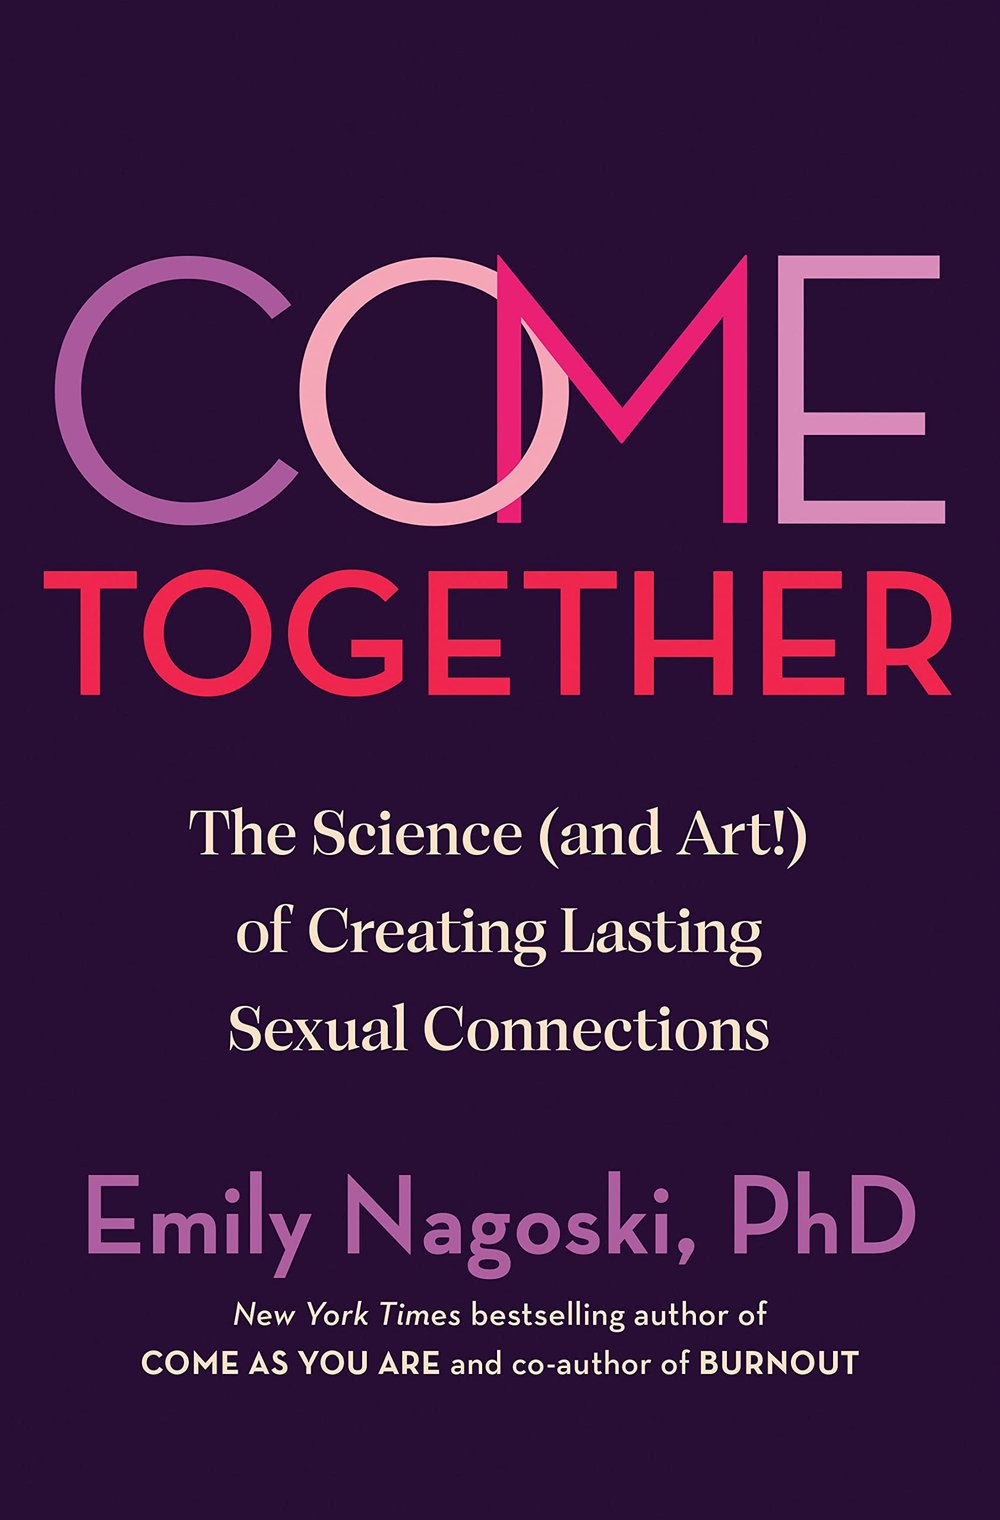 Come Together by Emily Nagoski, PhD